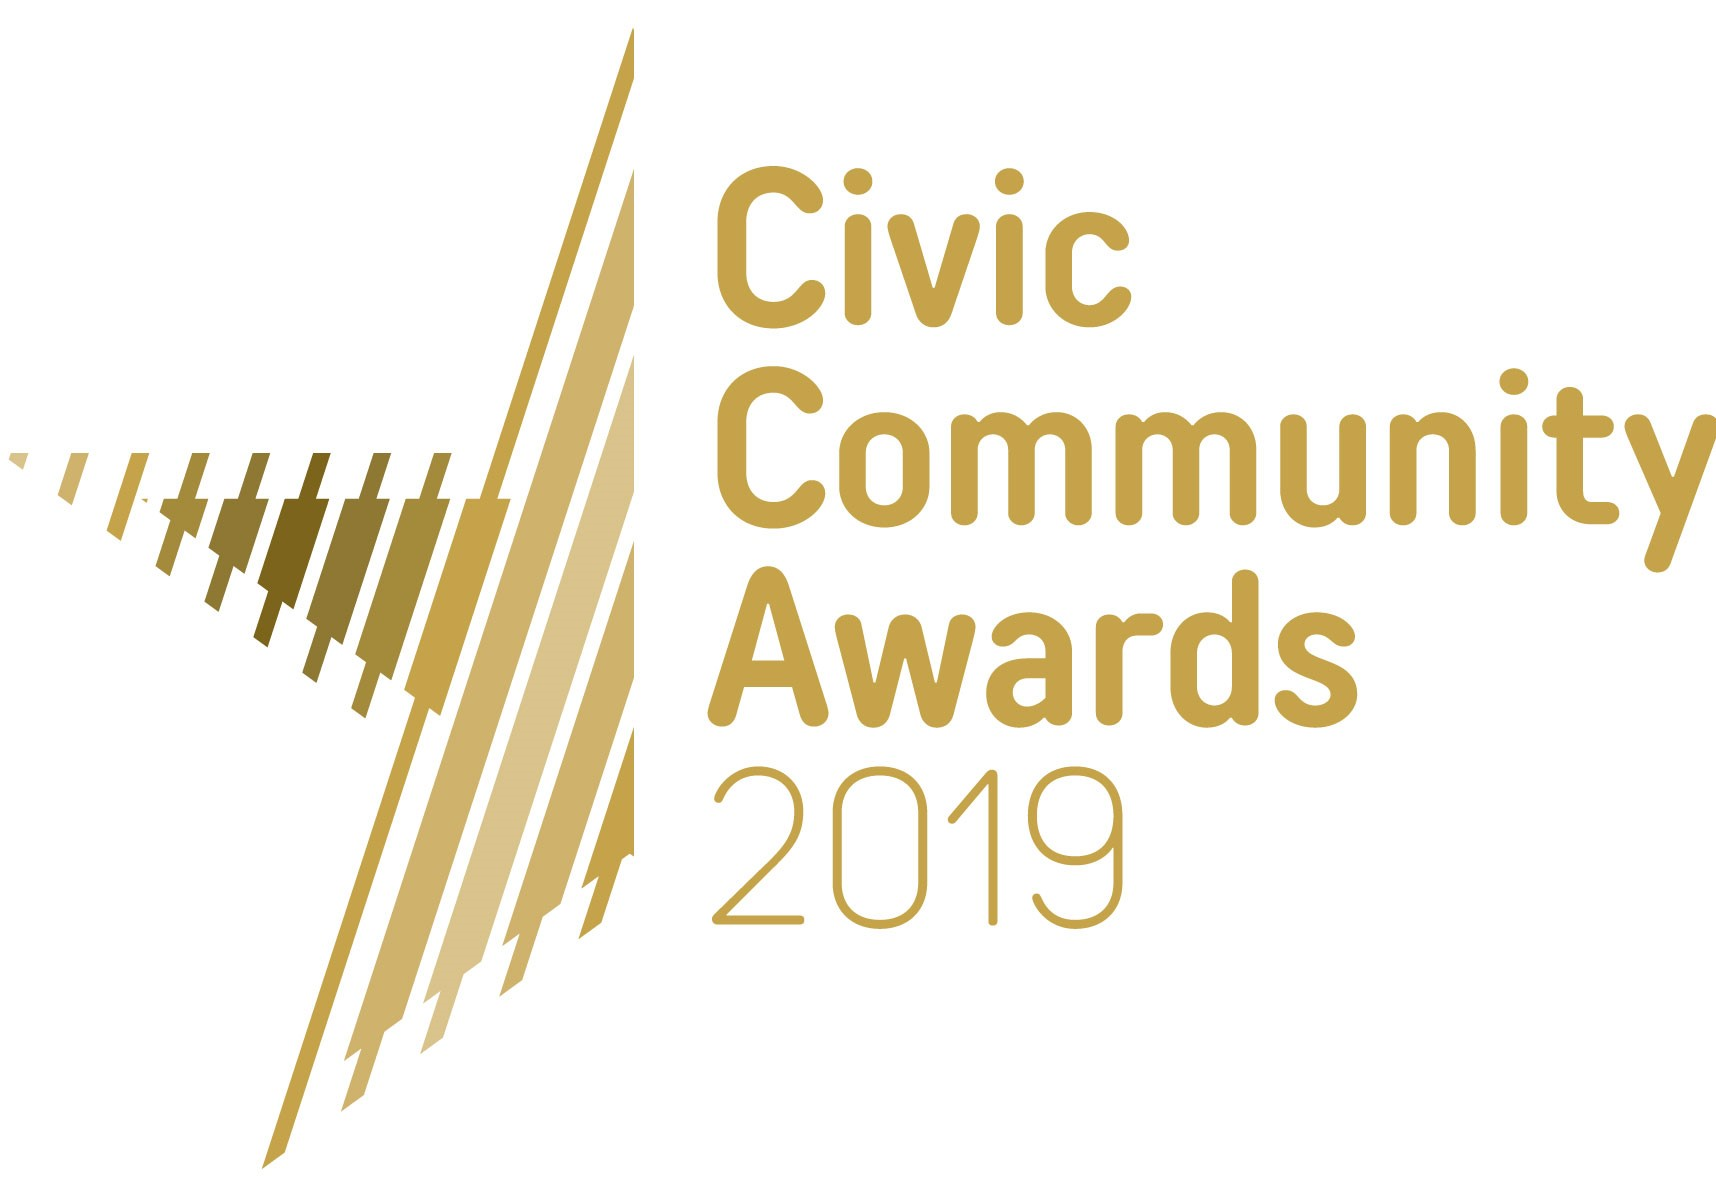 Hardwick House in Middlesbrough won a Community Civic Award 2019 for the Improving Employment Opportunities for Residents.